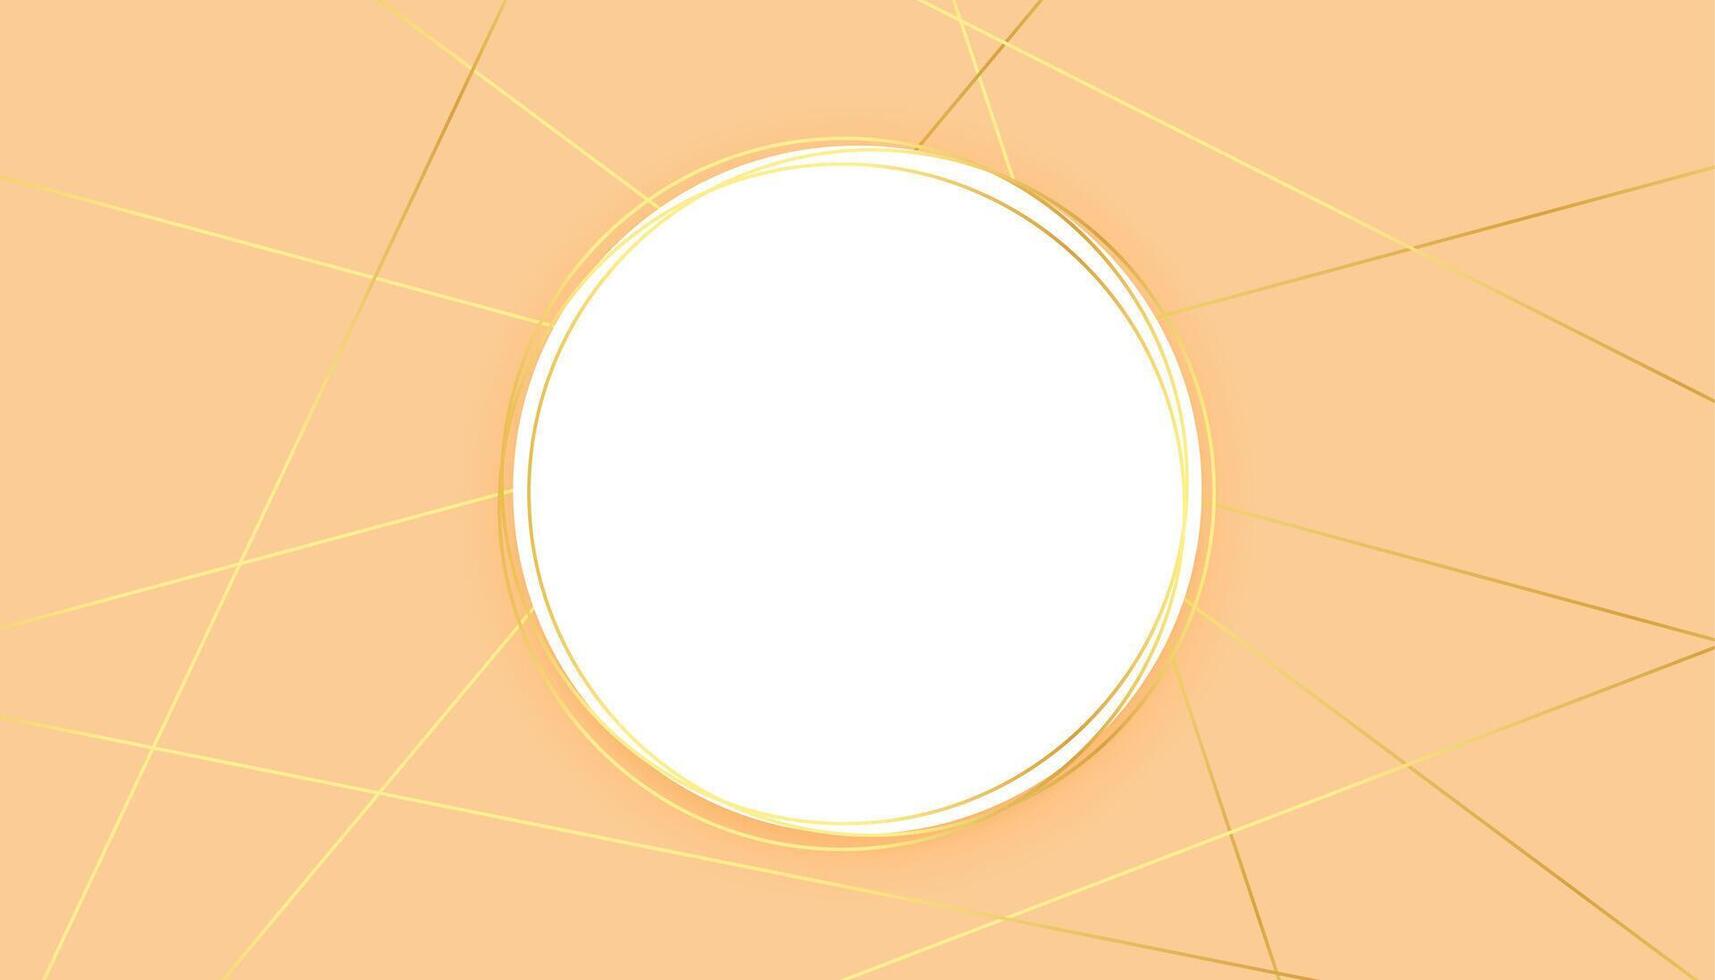 modern pastel background with golden lines shapes and circle frame vector